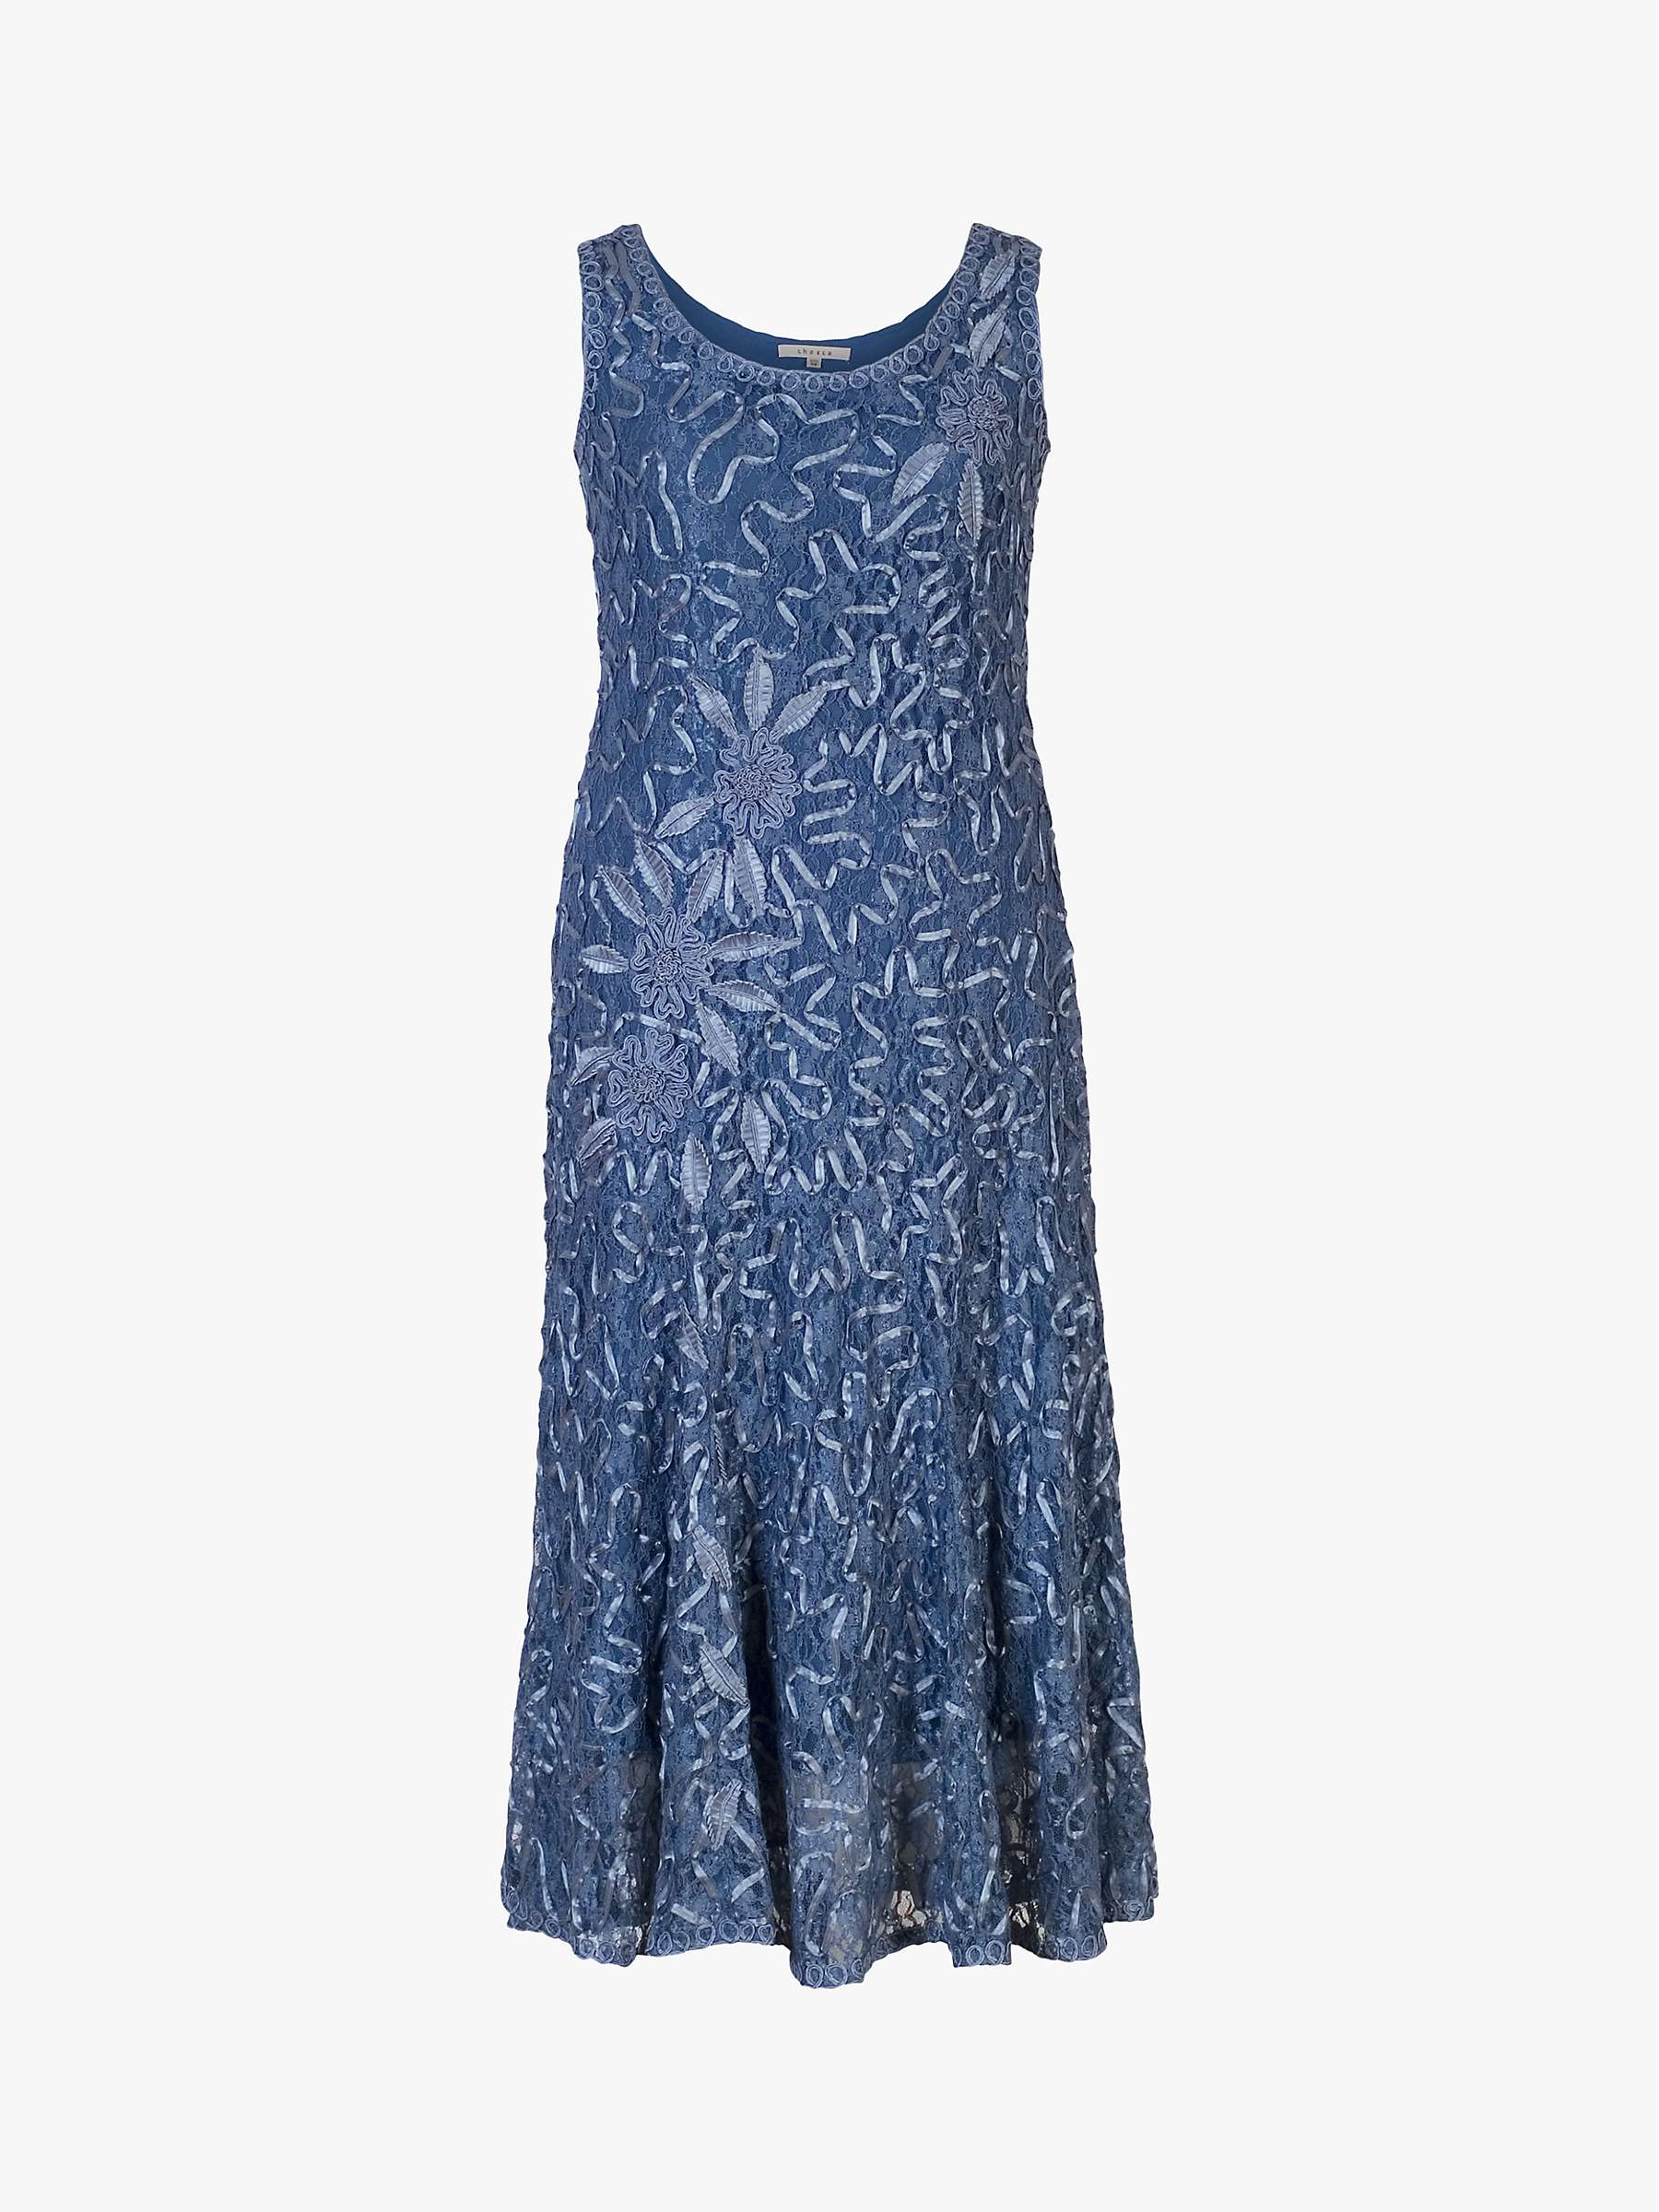 Buy Chesca Lace Cornelli Dress Online at johnlewis.com